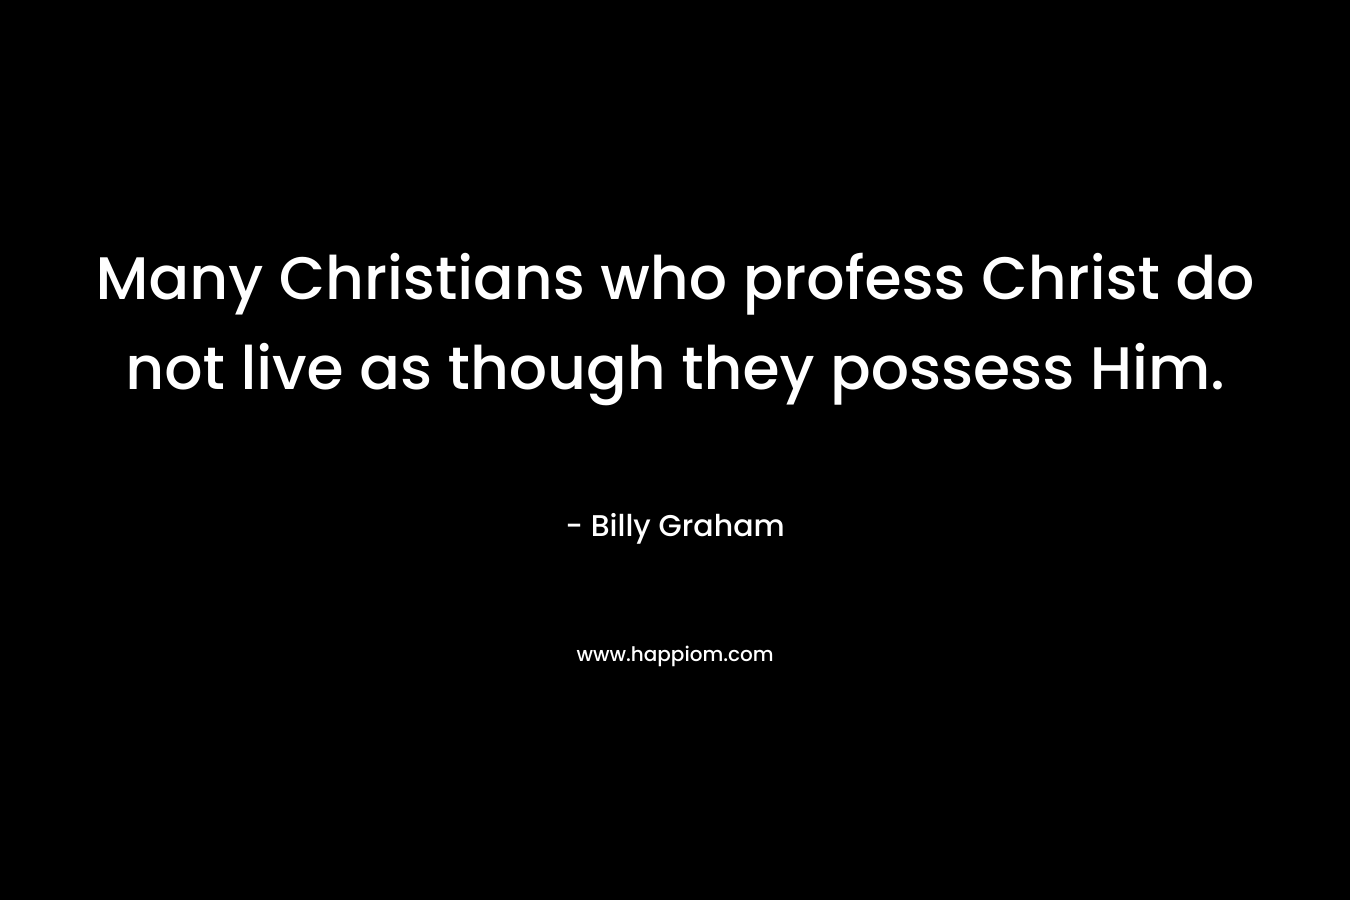 Many Christians who profess Christ do not live as though they possess Him.